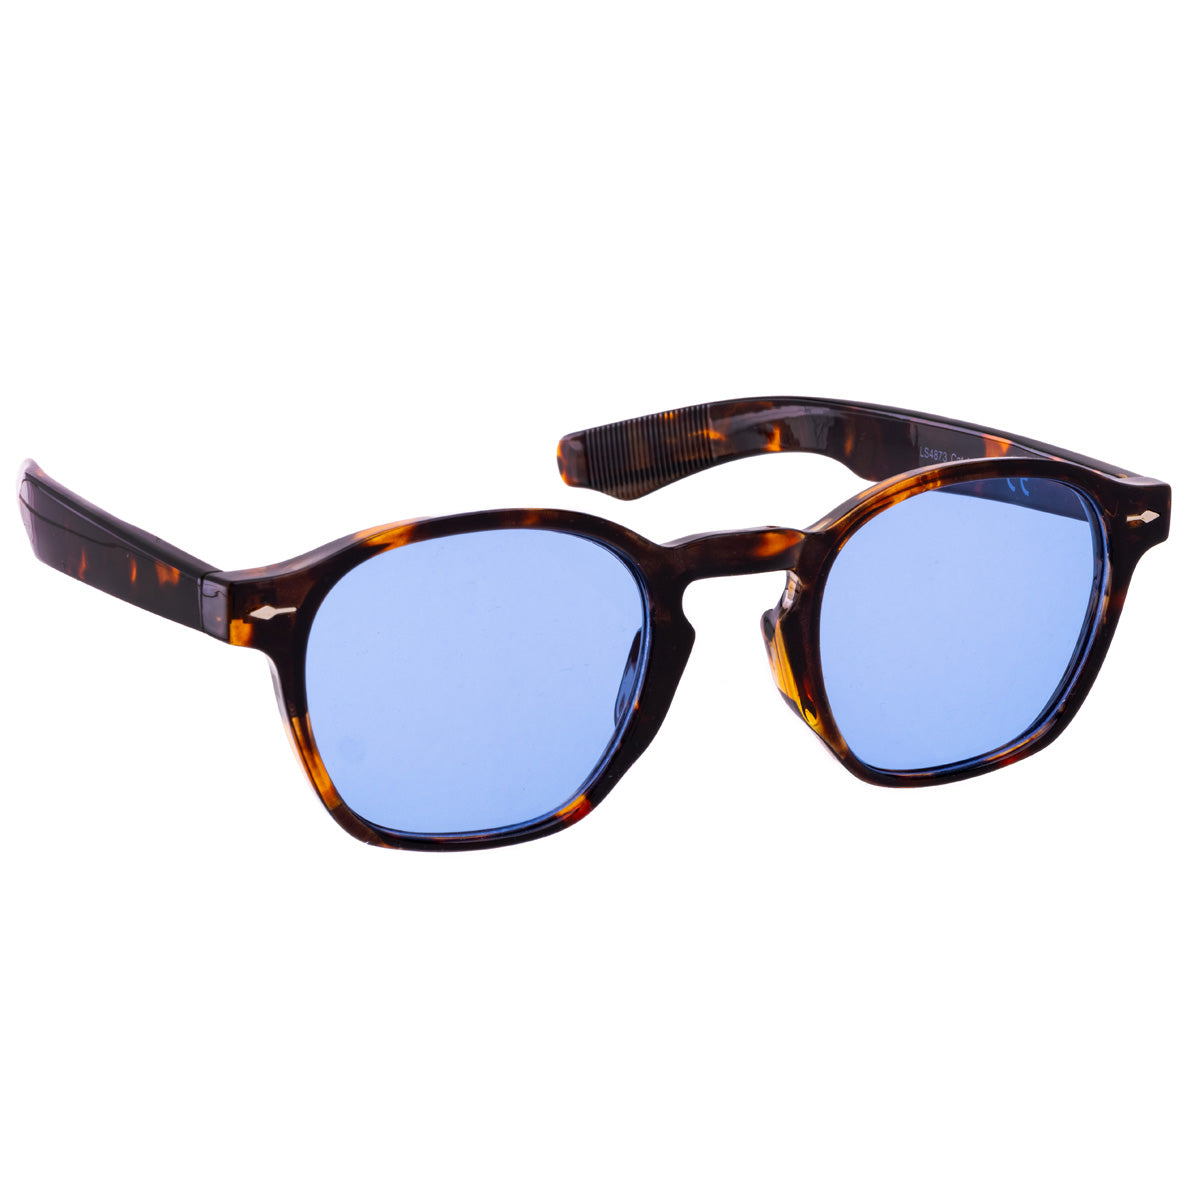 Round sunglasses with plastic frames